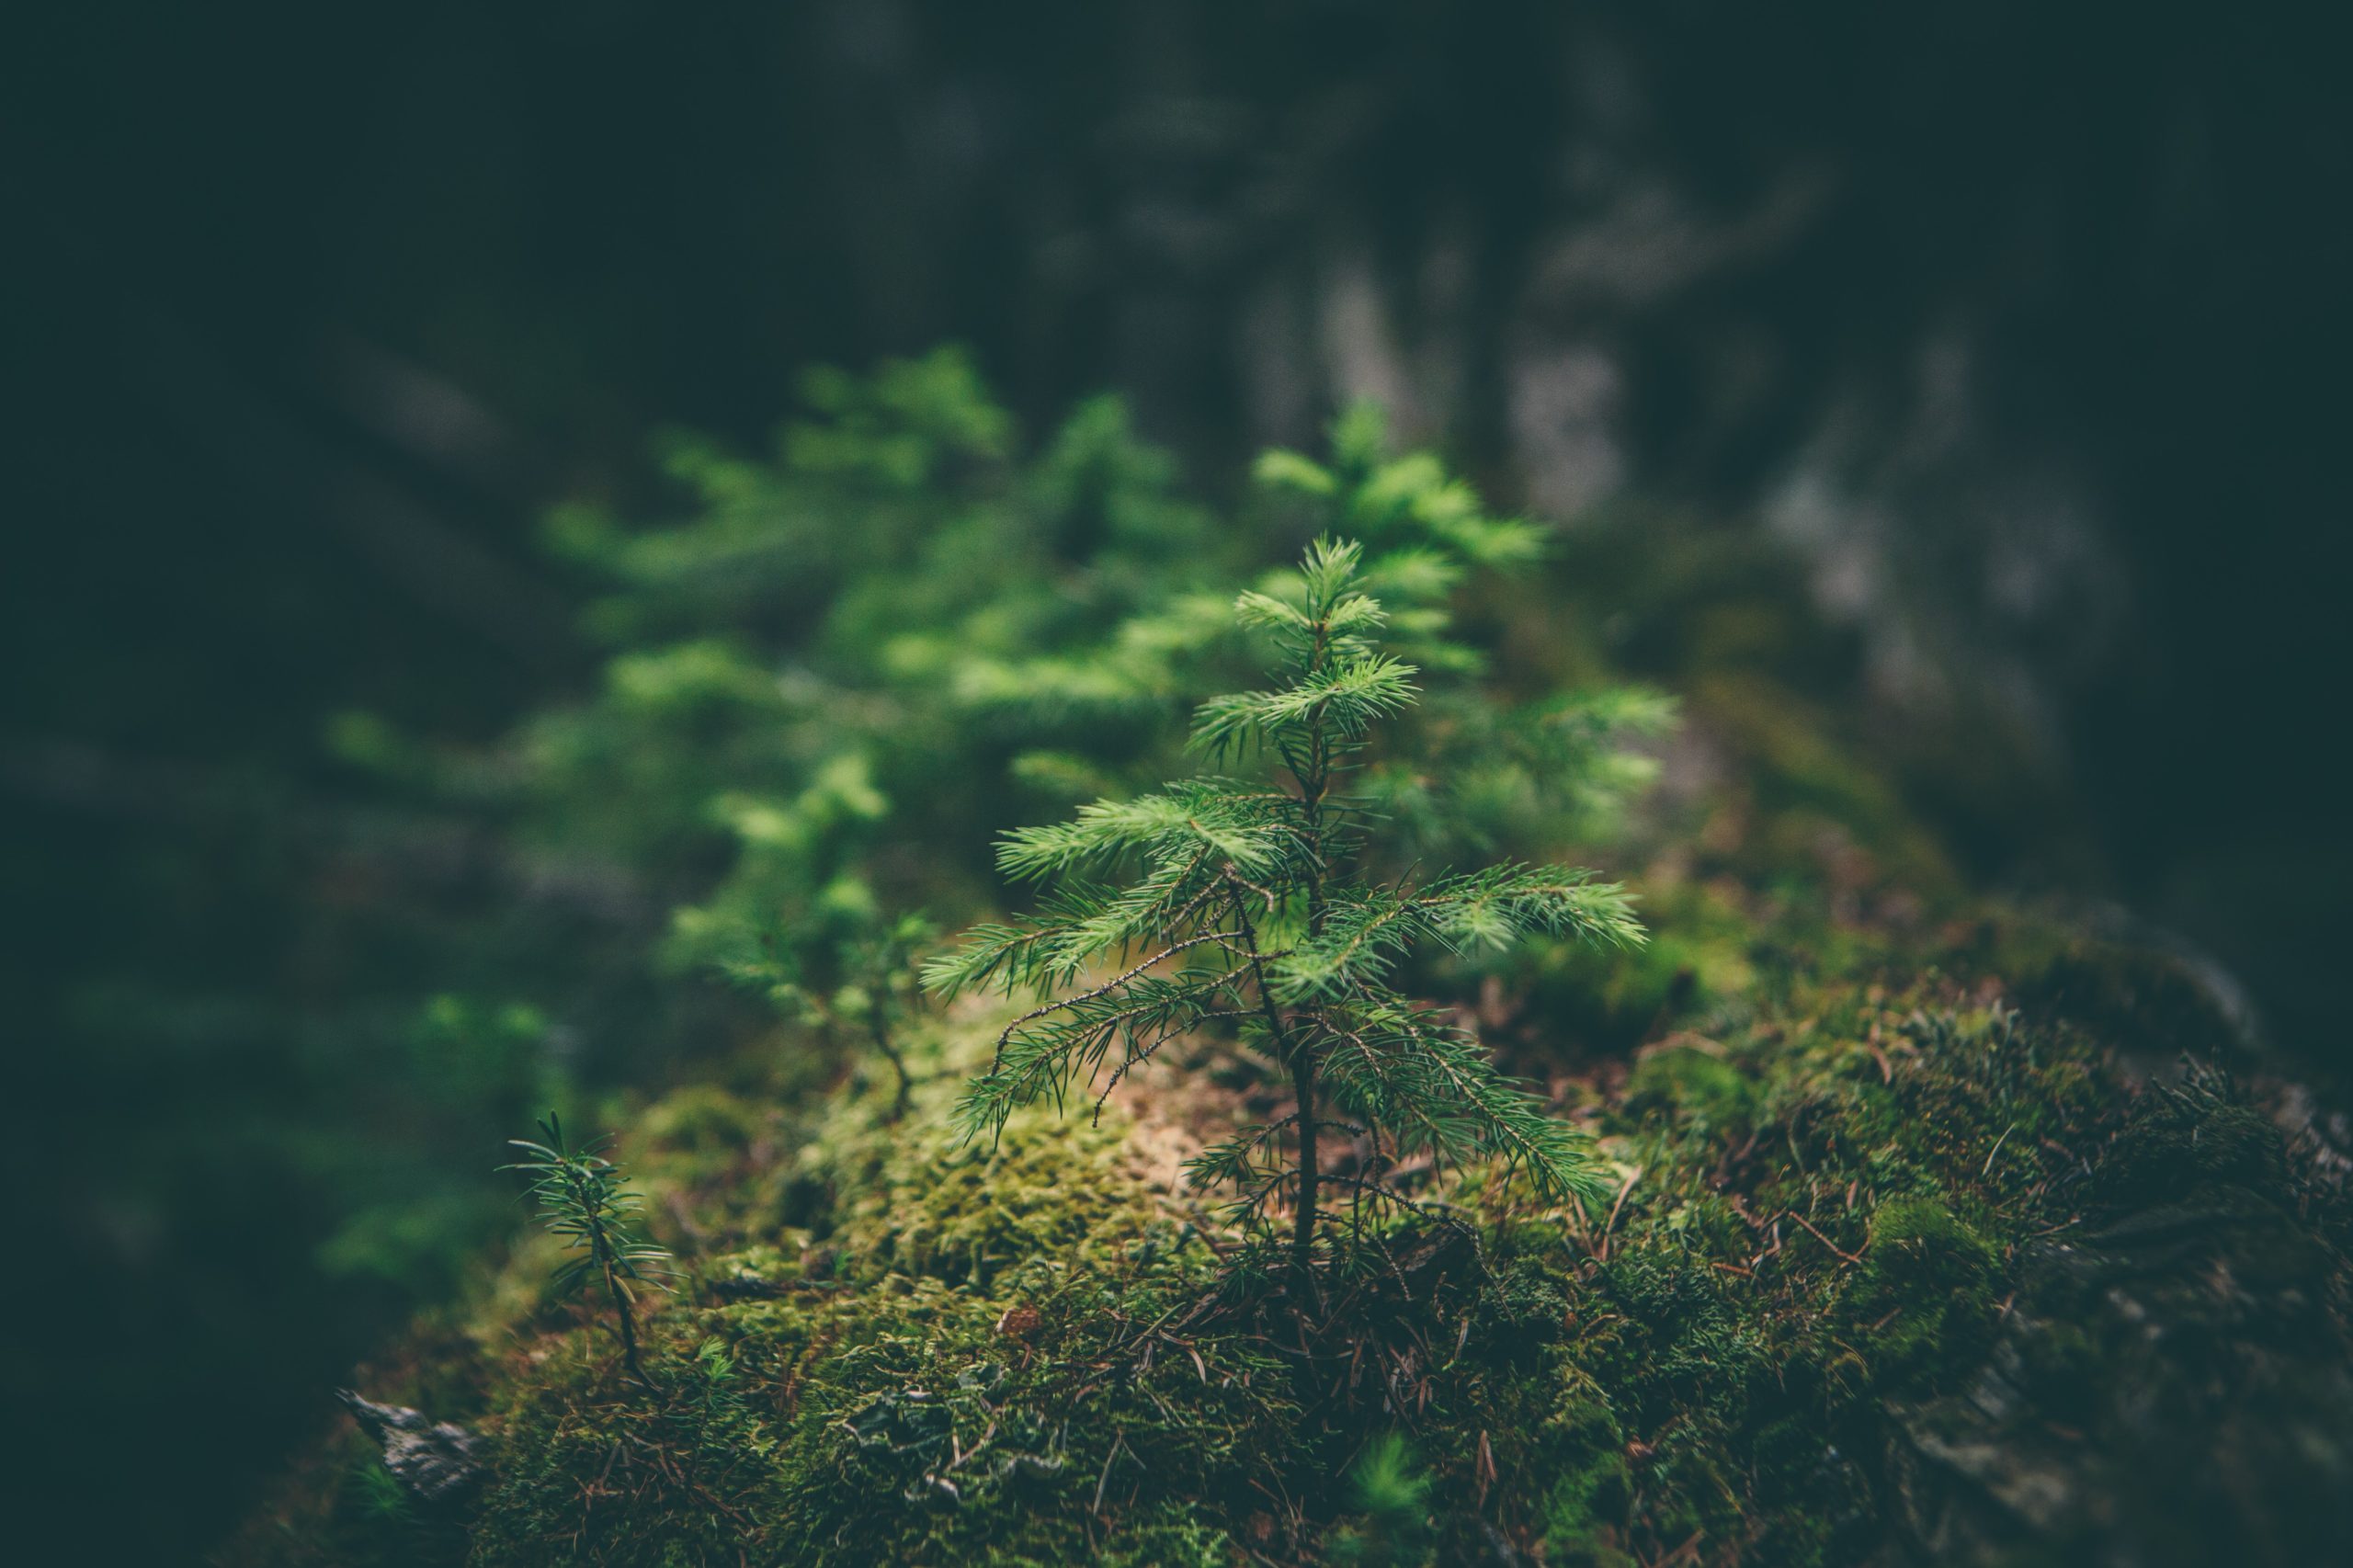 A small seedling growing in a forest.